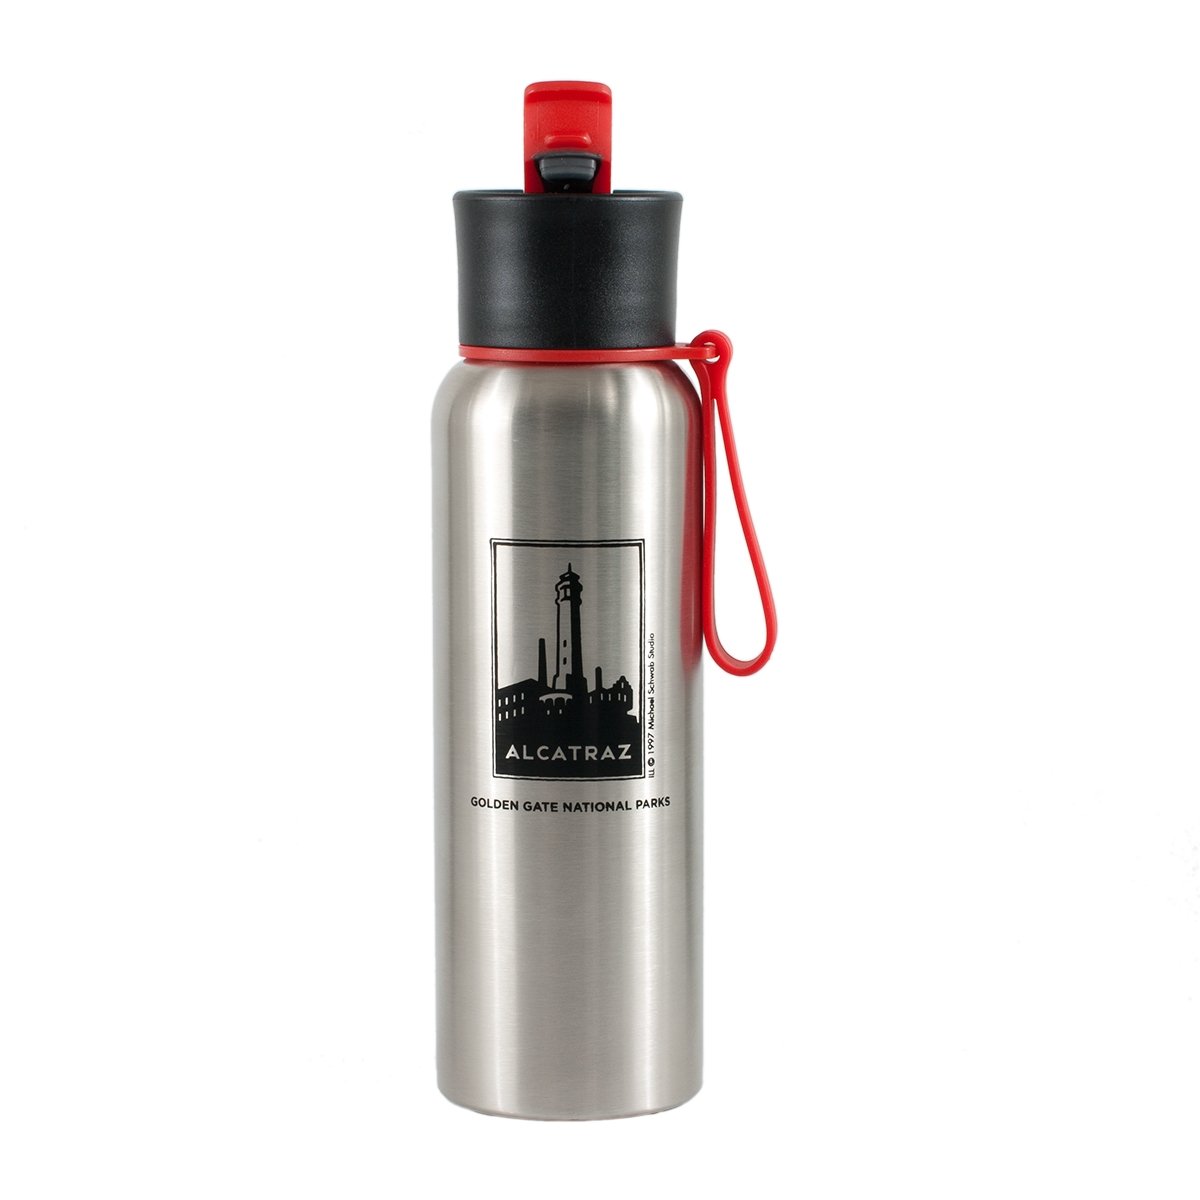 750 ml. stainless steel water bottle with red silicone strap and flip top, Alcatraz lighthouse design. Art by Michael Schwab.